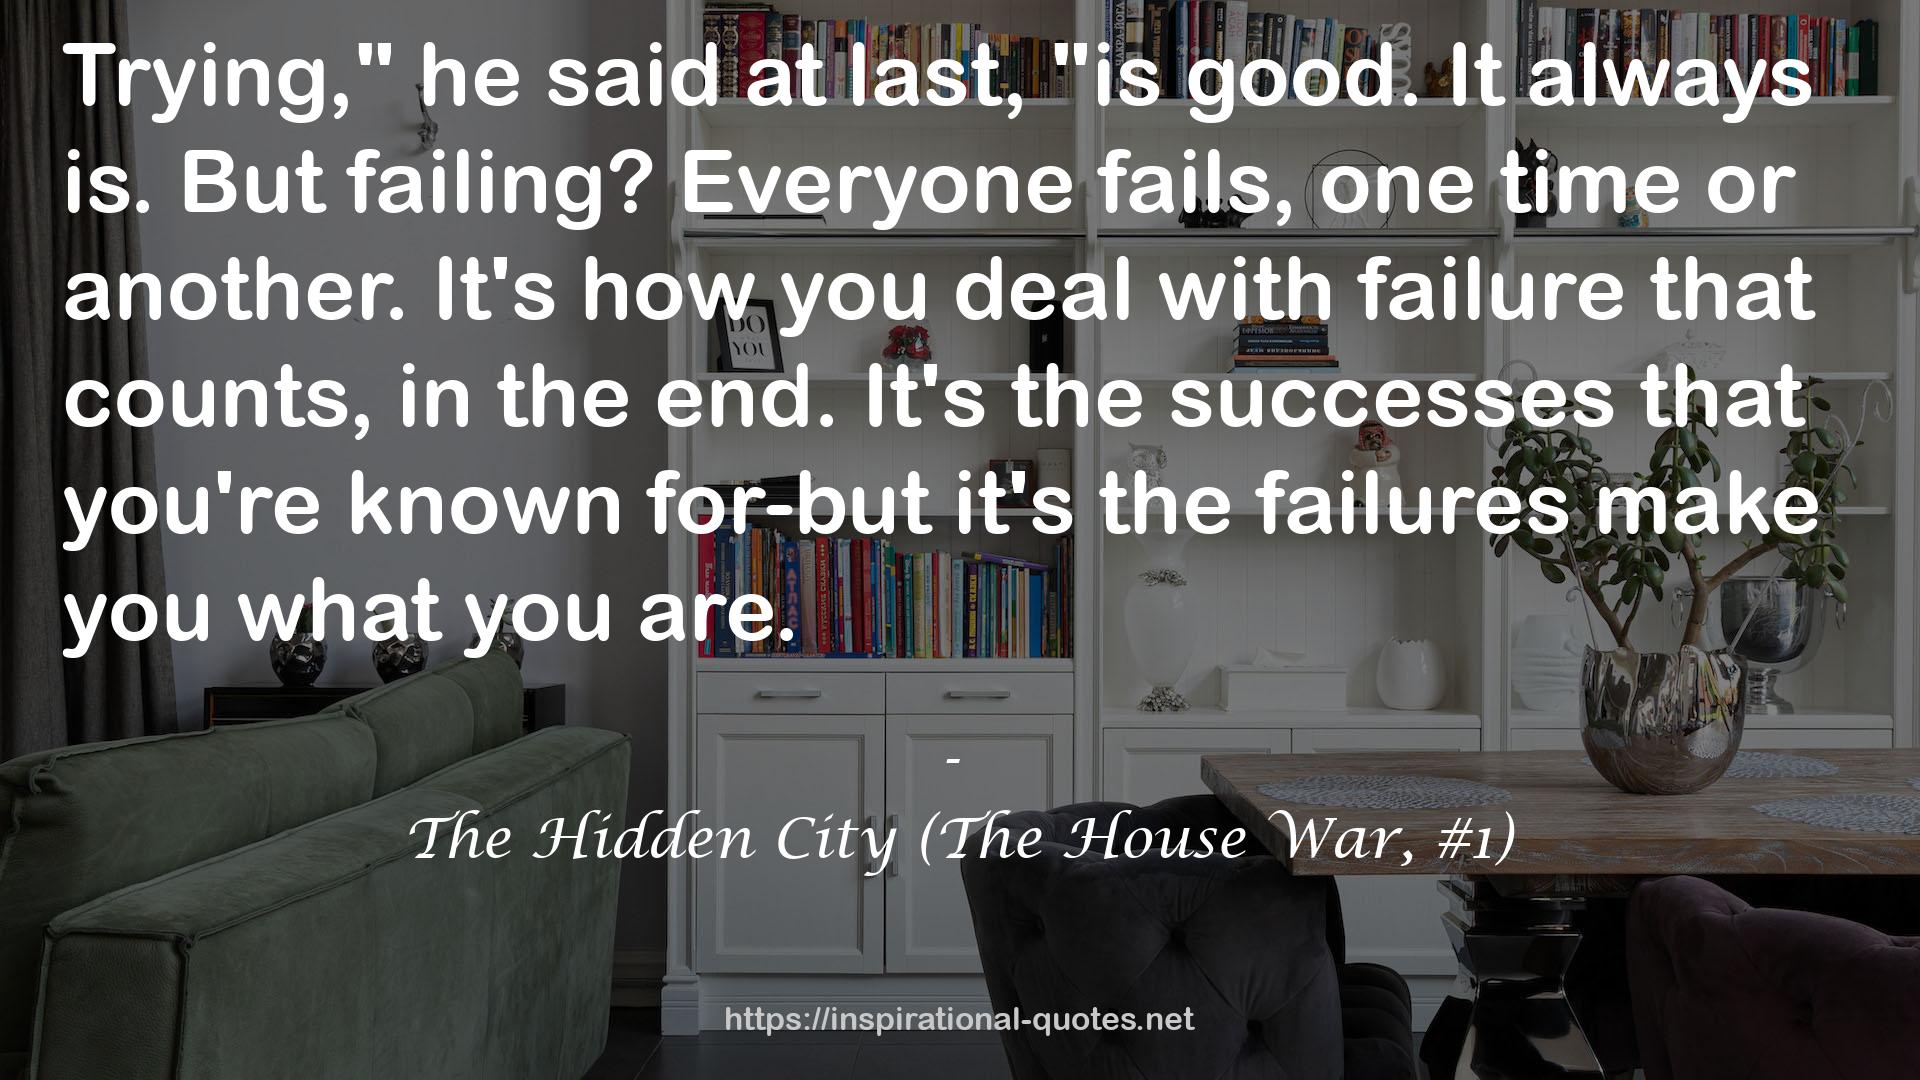 The Hidden City (The House War, #1) QUOTES